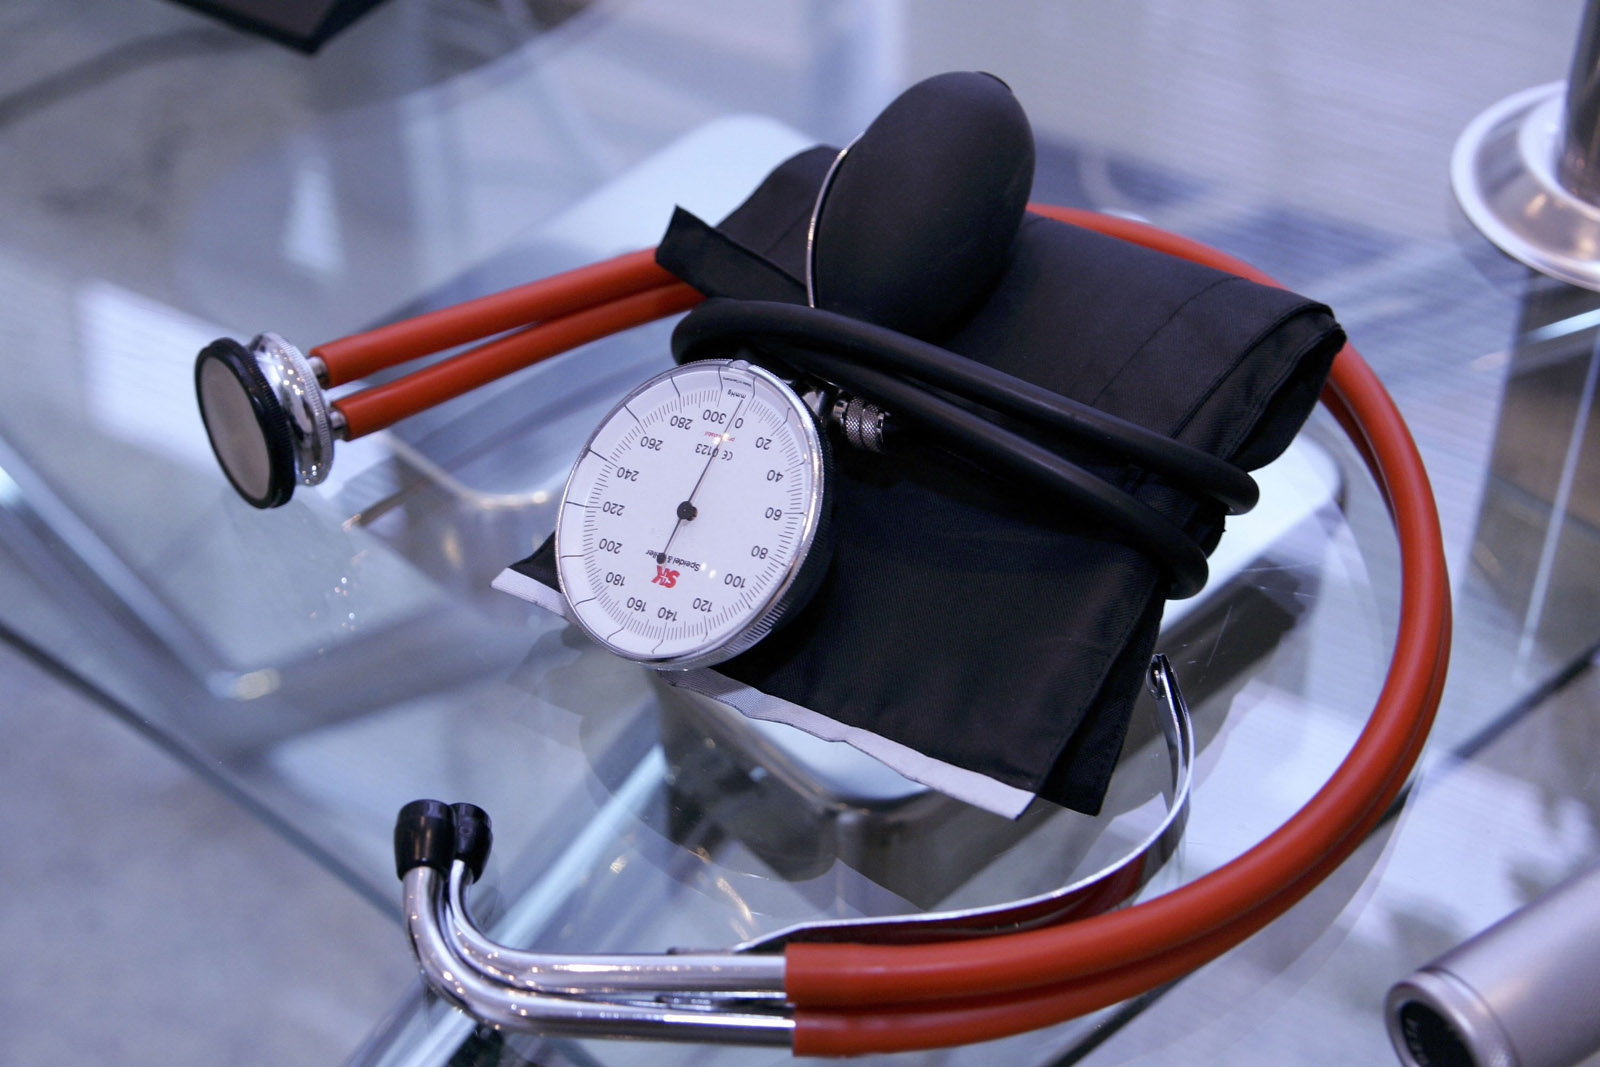 LUENEBURG, GERMANY - APRIL 01:  A stethoscope seen at a doctor's office on April 1, 2006 in Lueneburg, Germany. (Photo Illustration by Andreas Rentz/Getty Images)